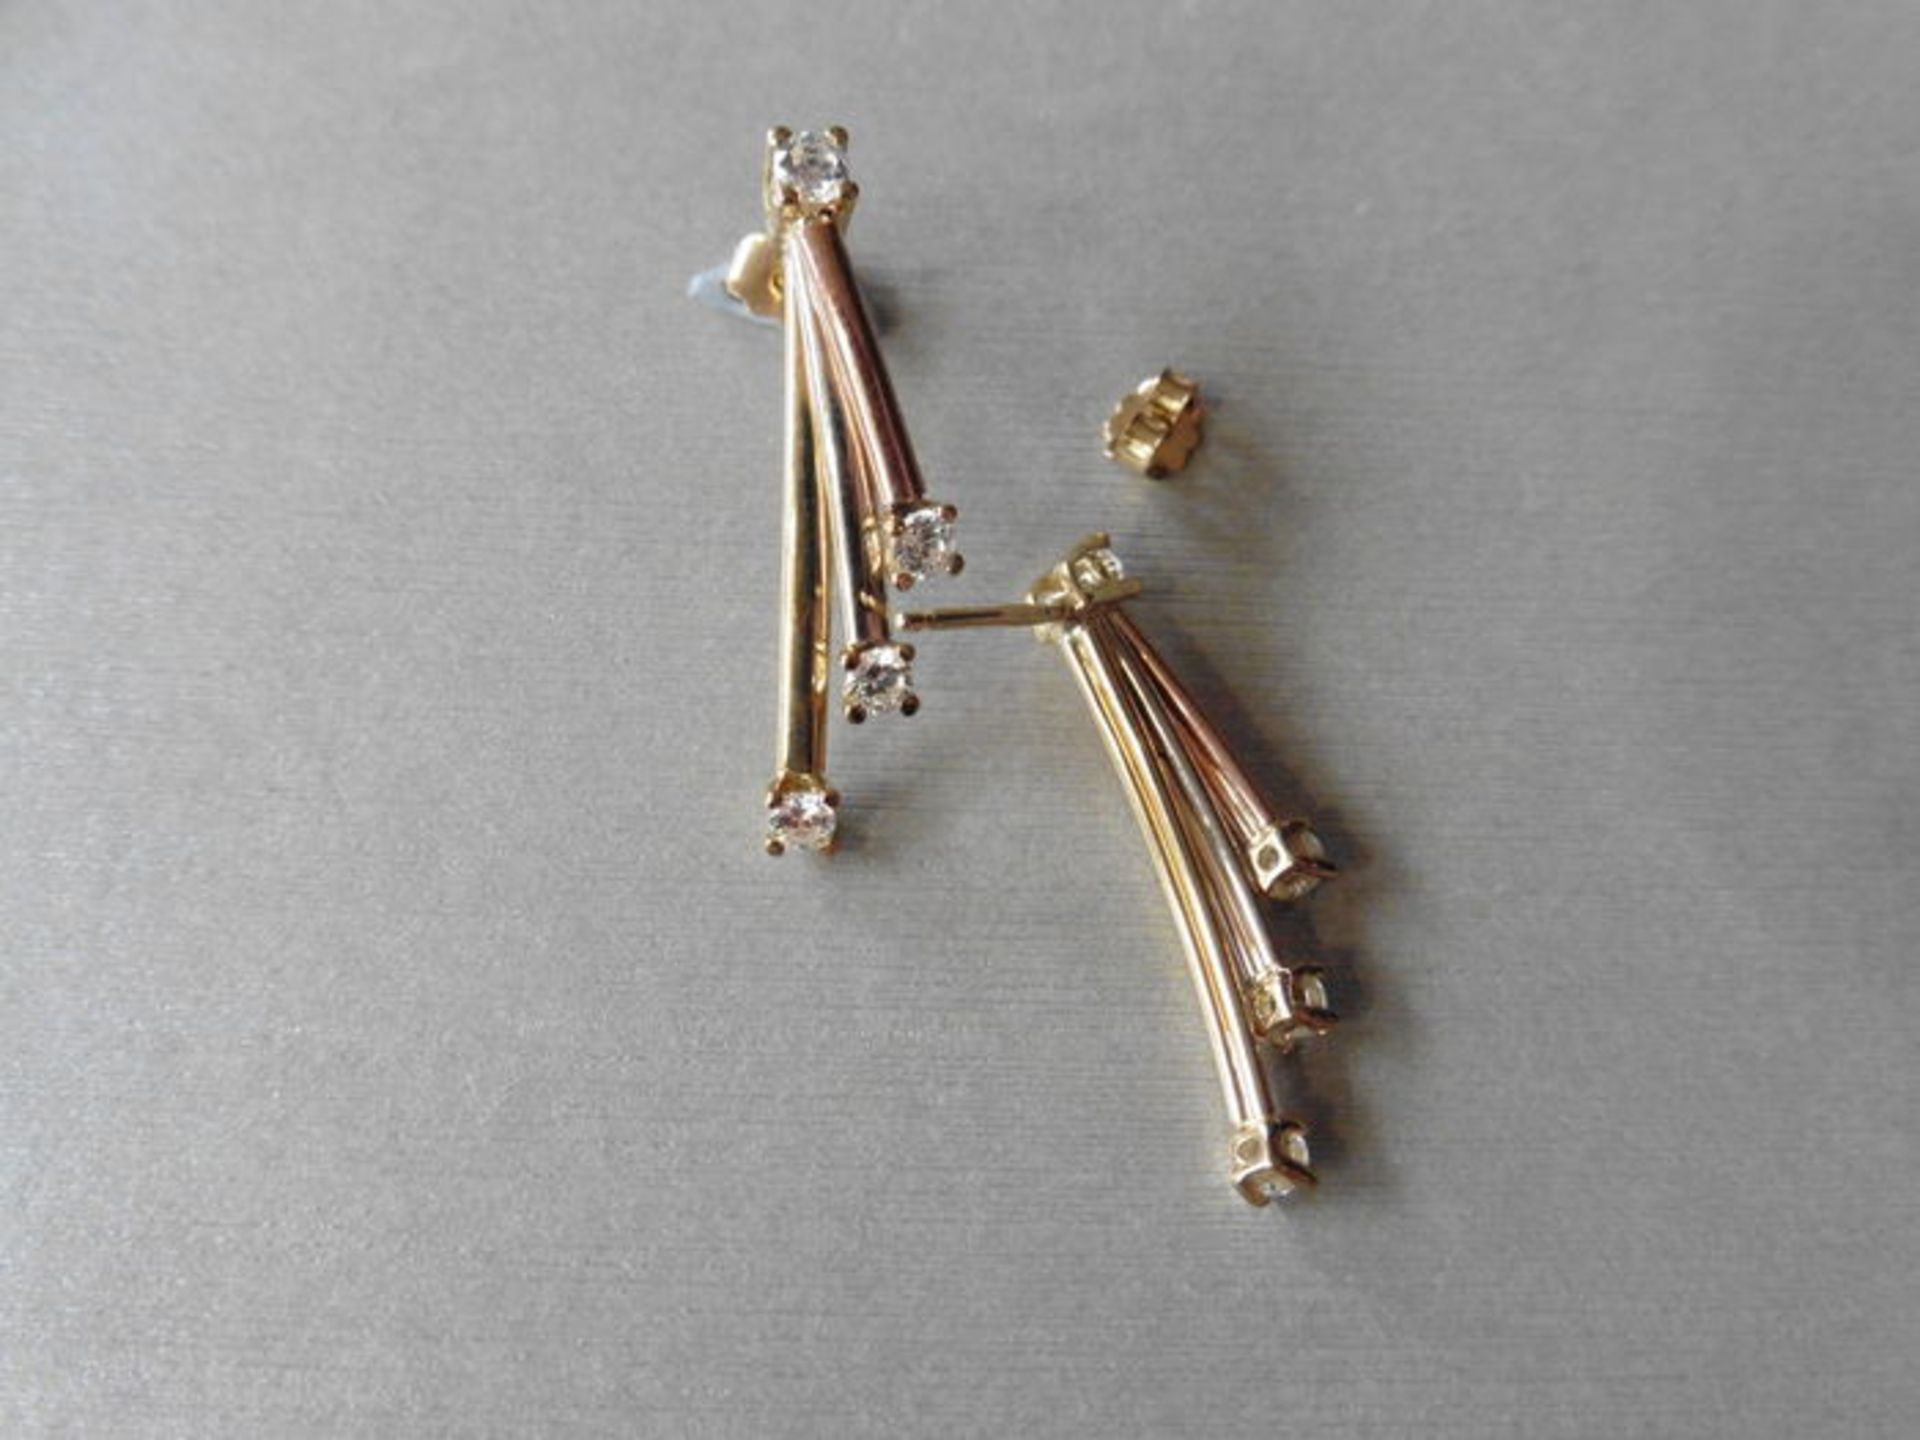 9ct gold diamond set drop style earrings. Set with white, rose and yellow gold bars with a small - Image 5 of 5